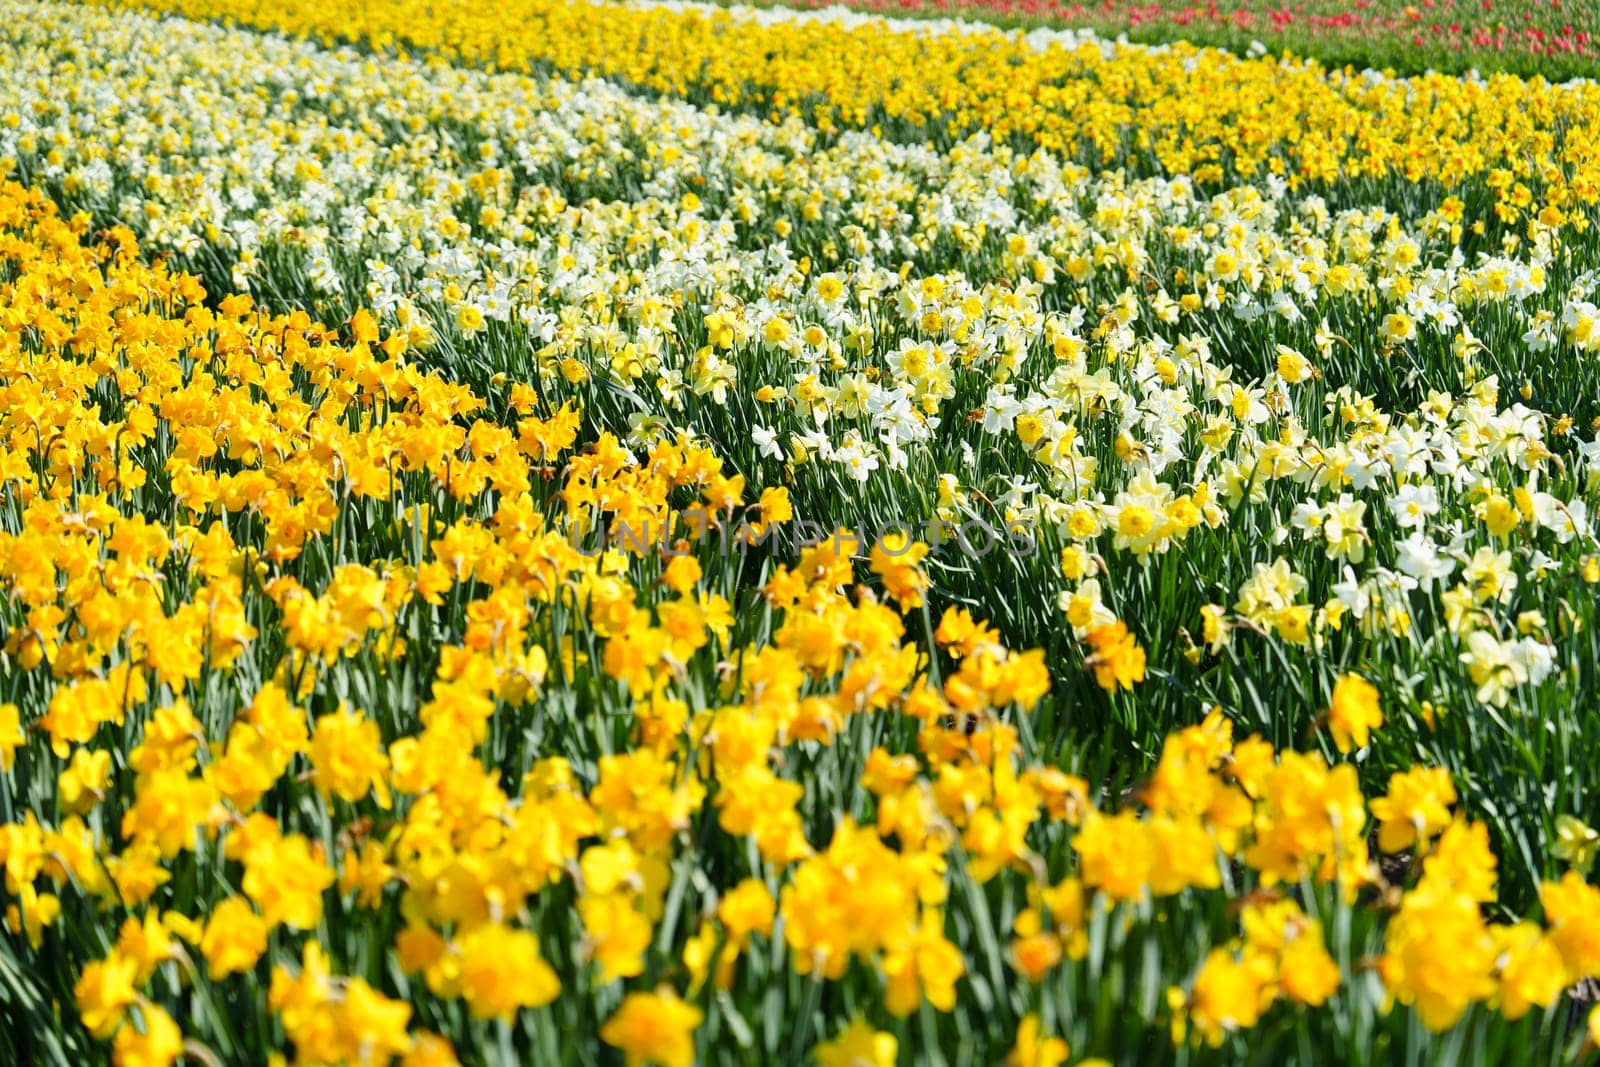 Scenic view of the Dutch countryside in spring showcasing countless yellow daffodils in full bloom, creating a mesmerizing and colorful natural carpet